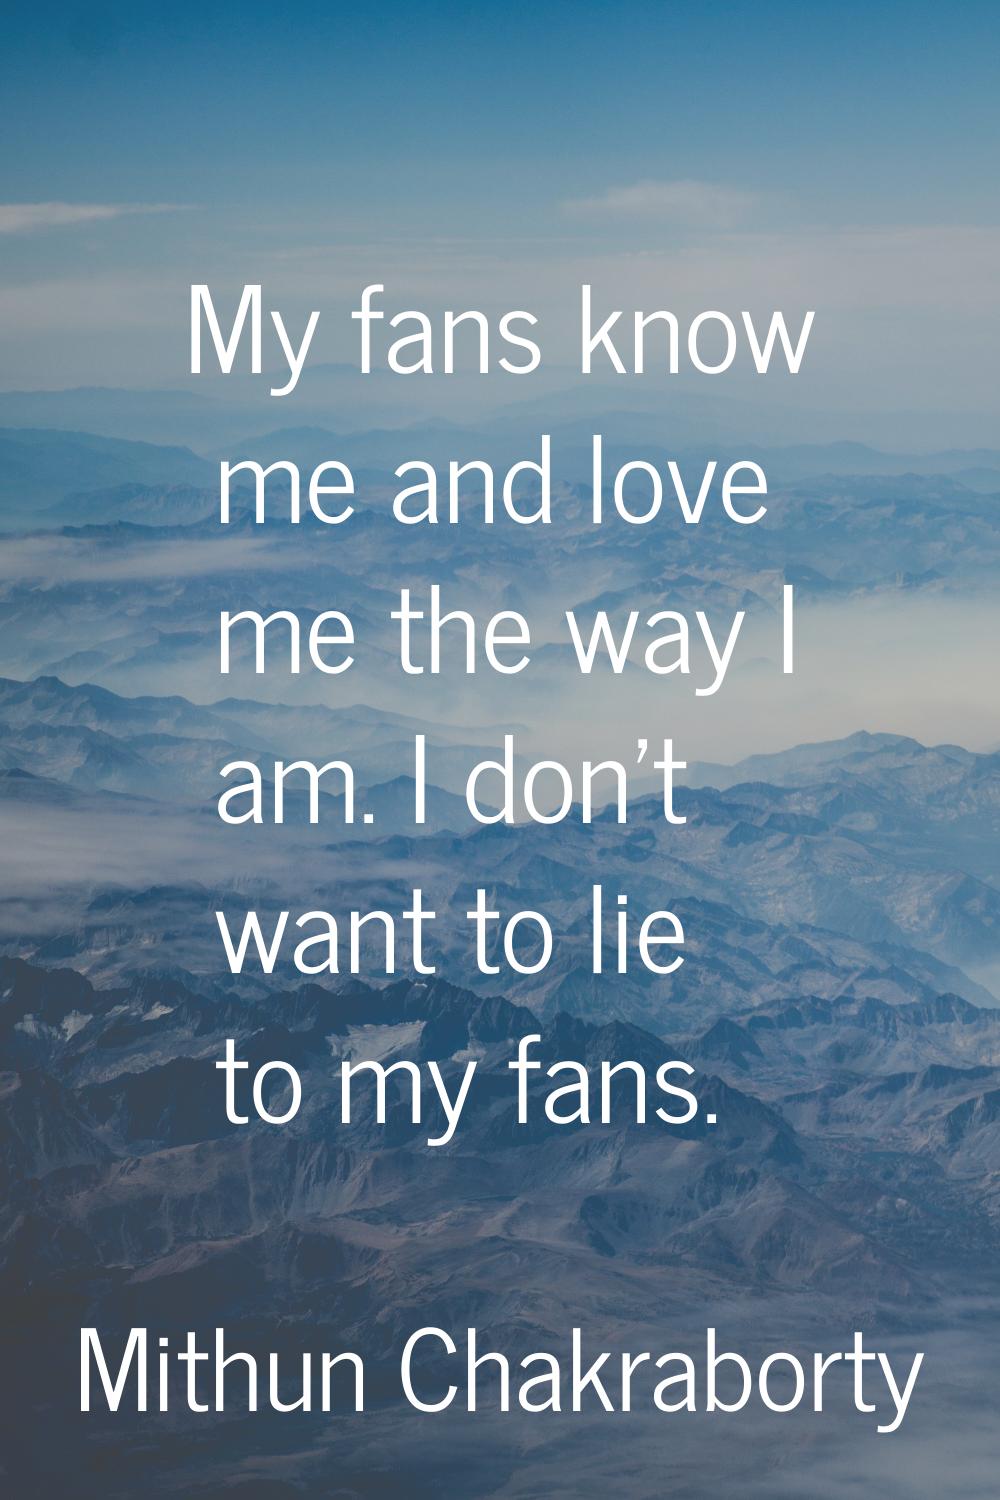 My fans know me and love me the way I am. I don't want to lie to my fans.